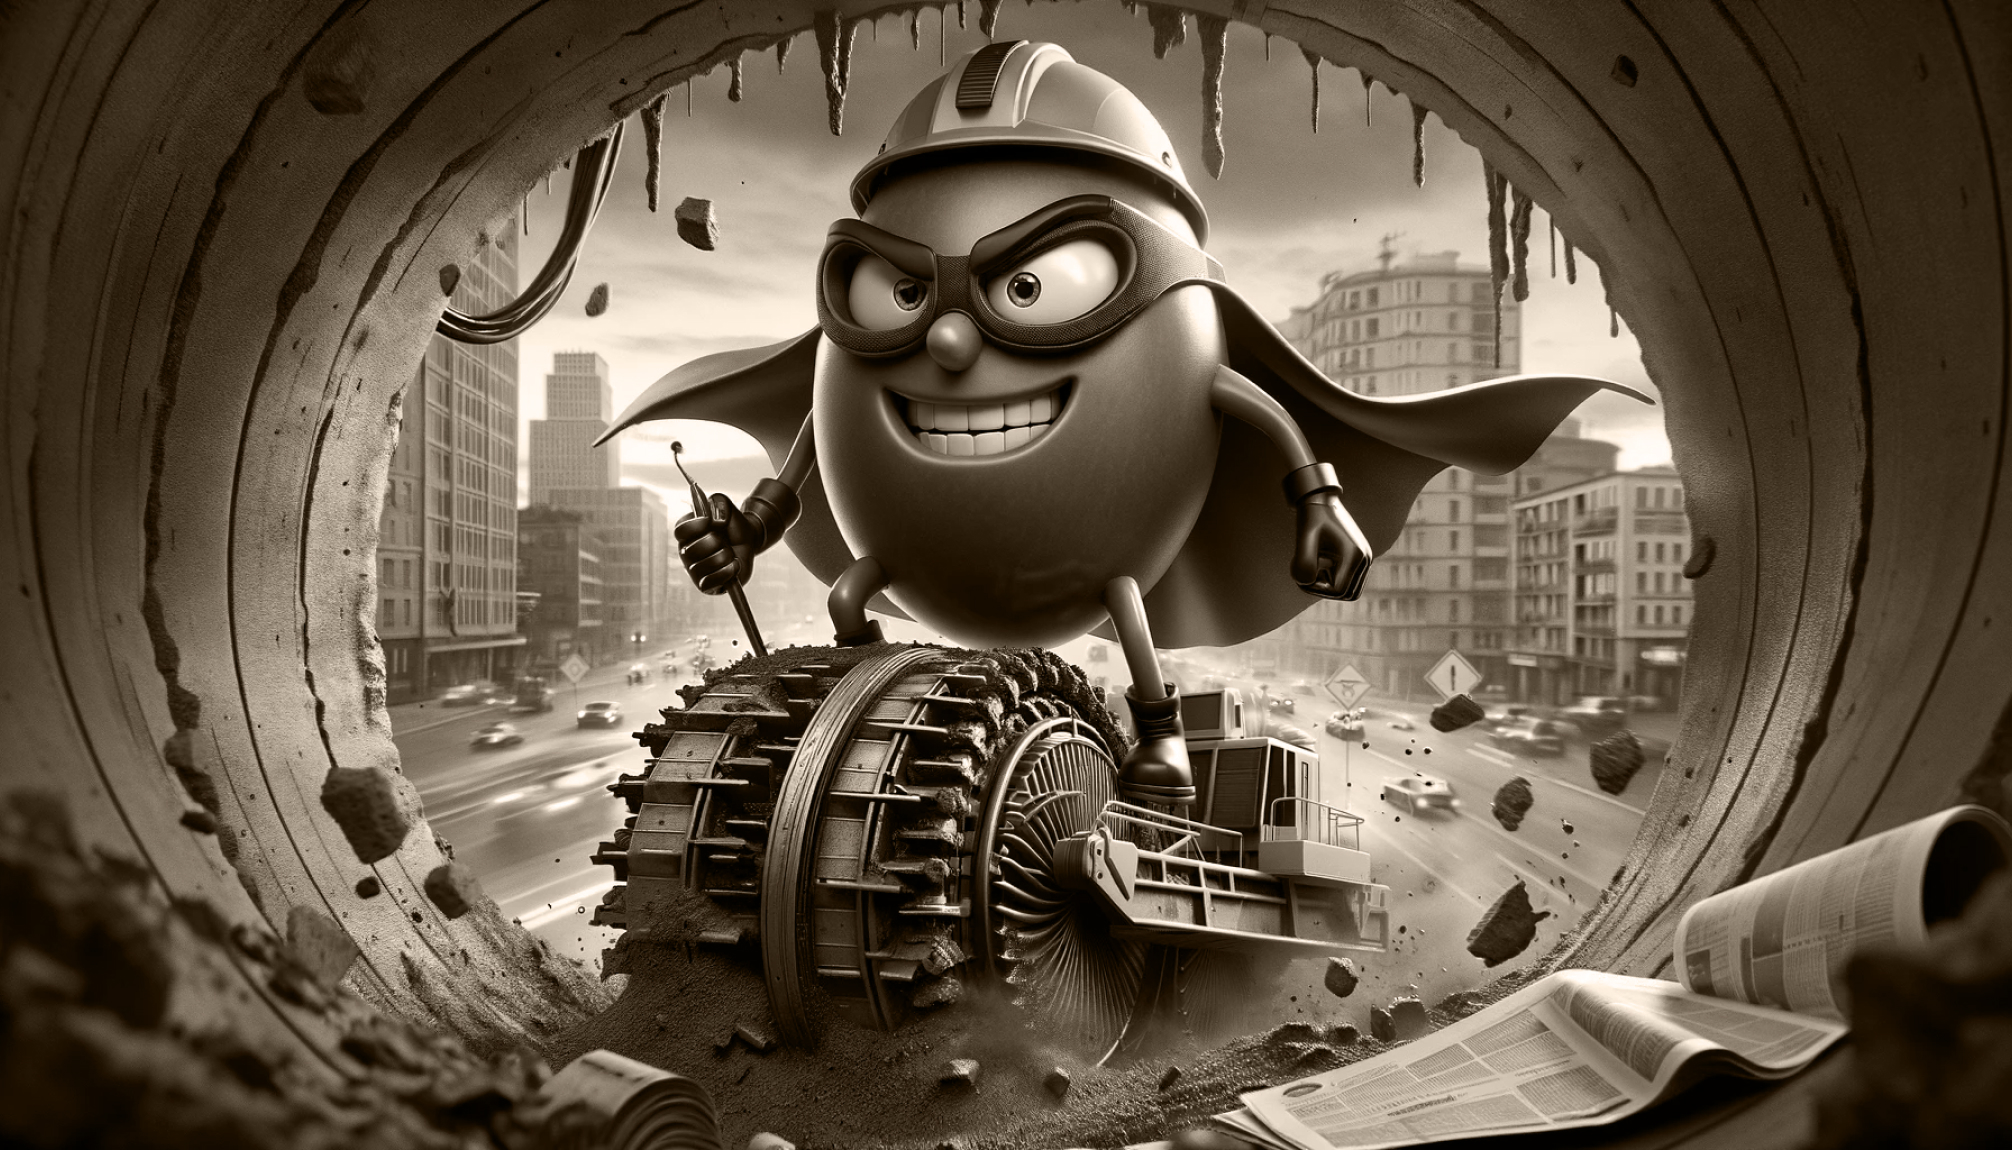 an evil olive stands on top of an earth boring machine within a tunnel with an evil grin while the city behind it is blurred in motion
